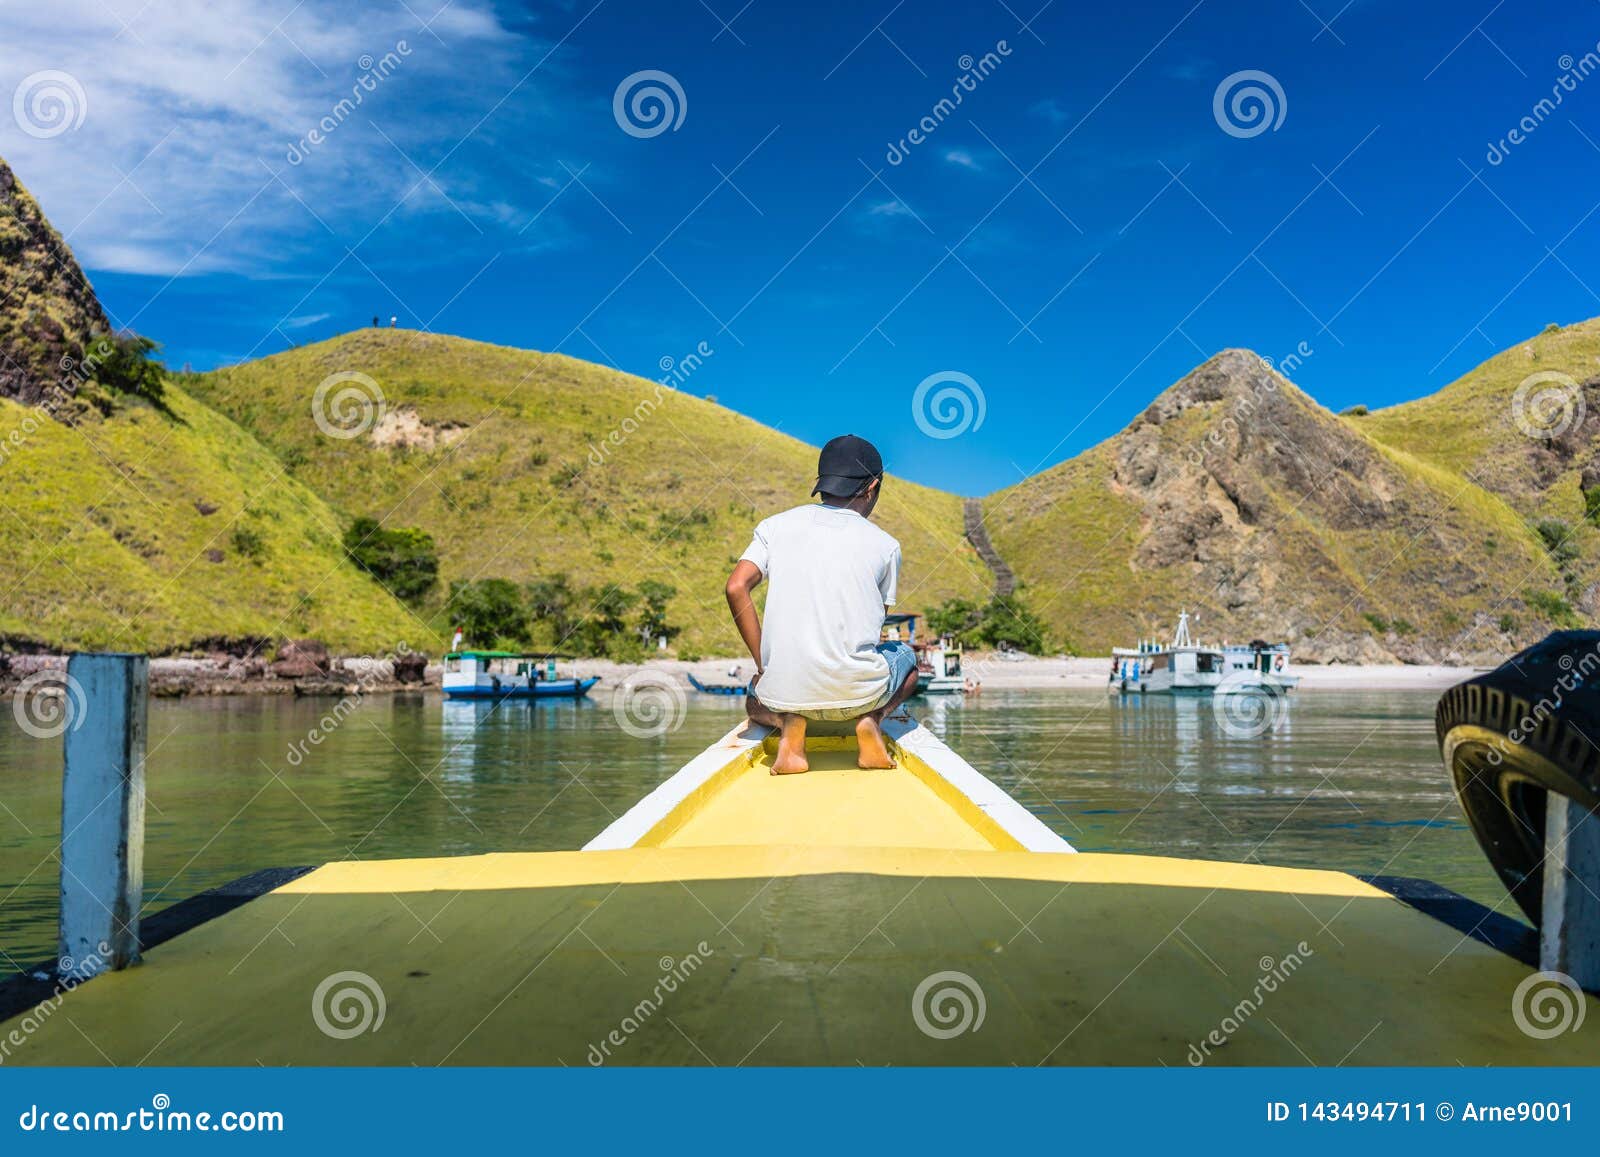 young man enjoying the tranquil view of padar island during summer vacation